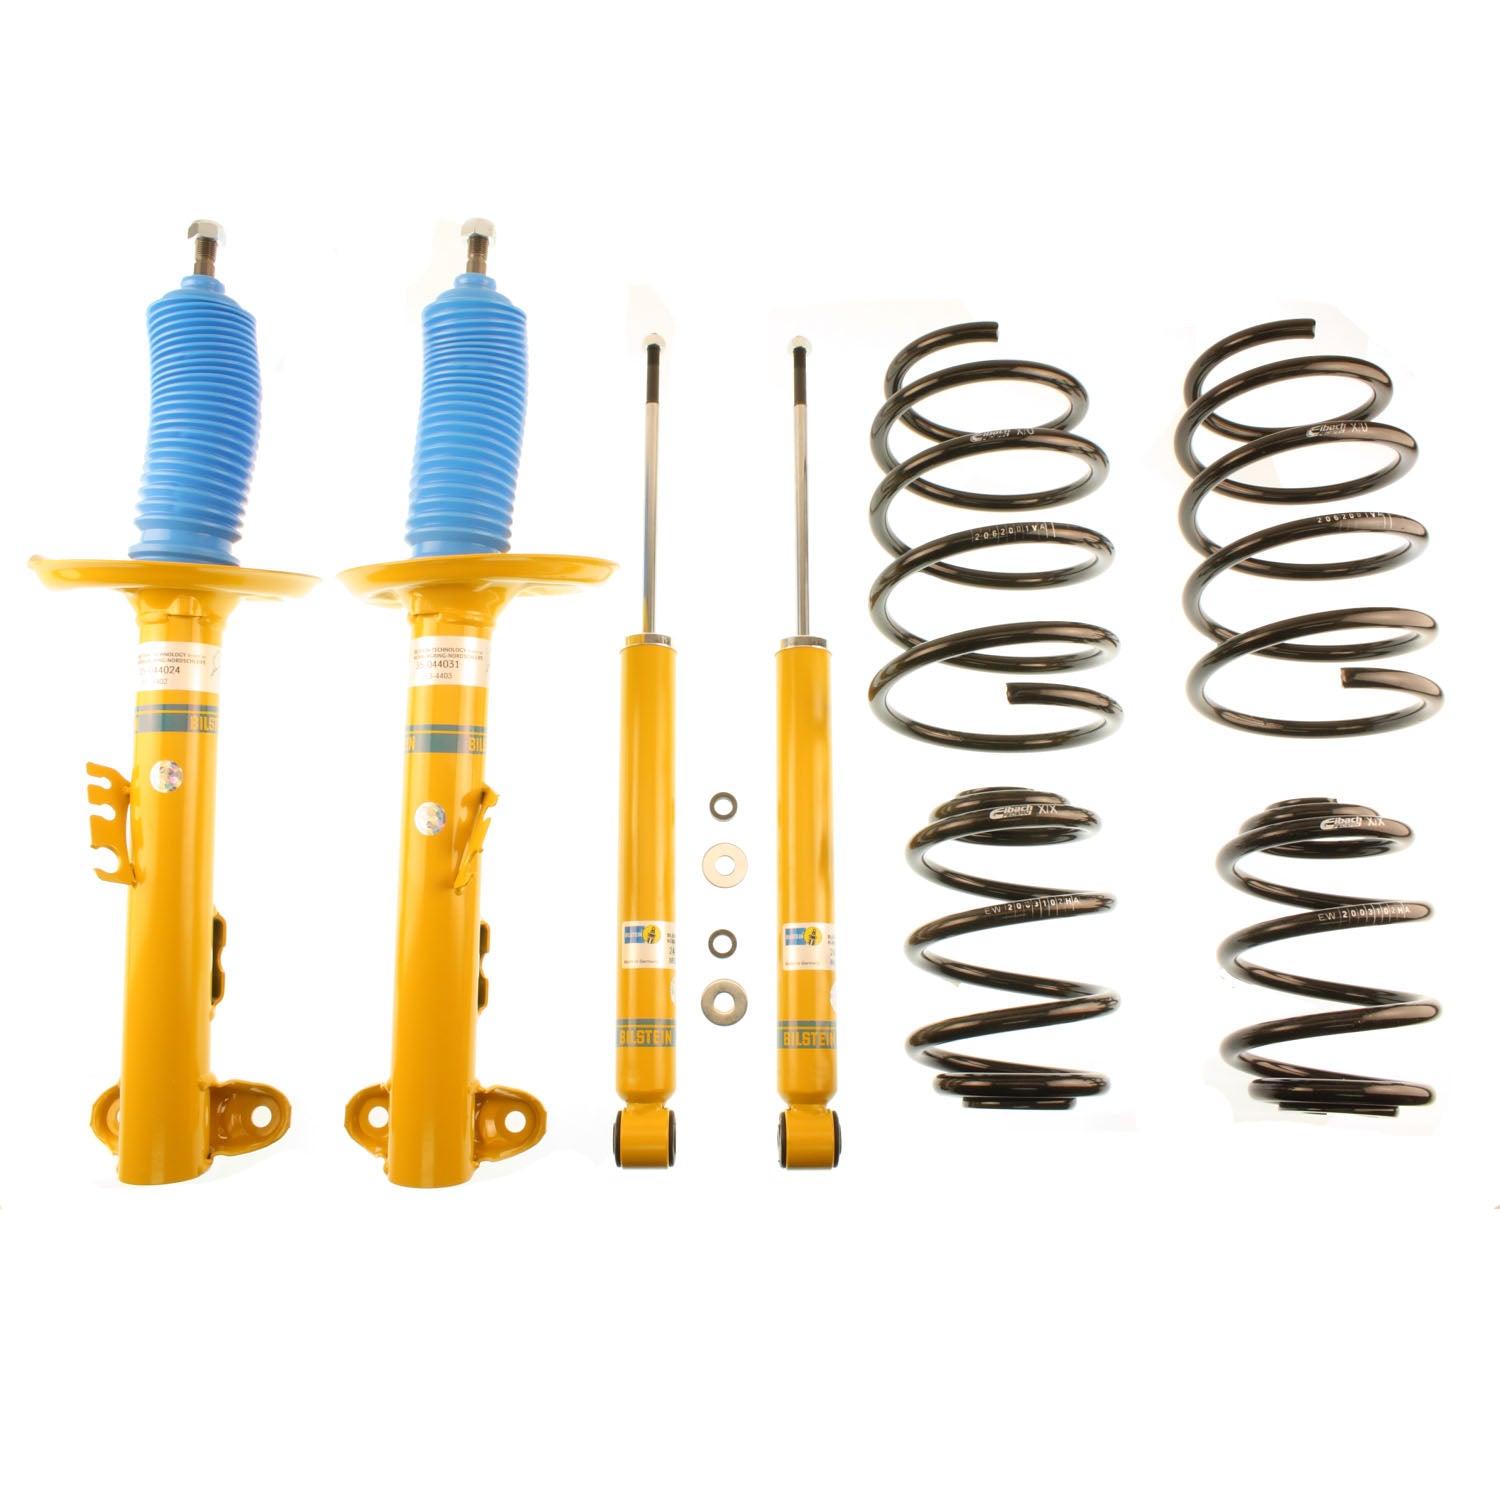 BMW E46 tuning: The perfect lowering solution with the right BILSTEIN  sports suspension